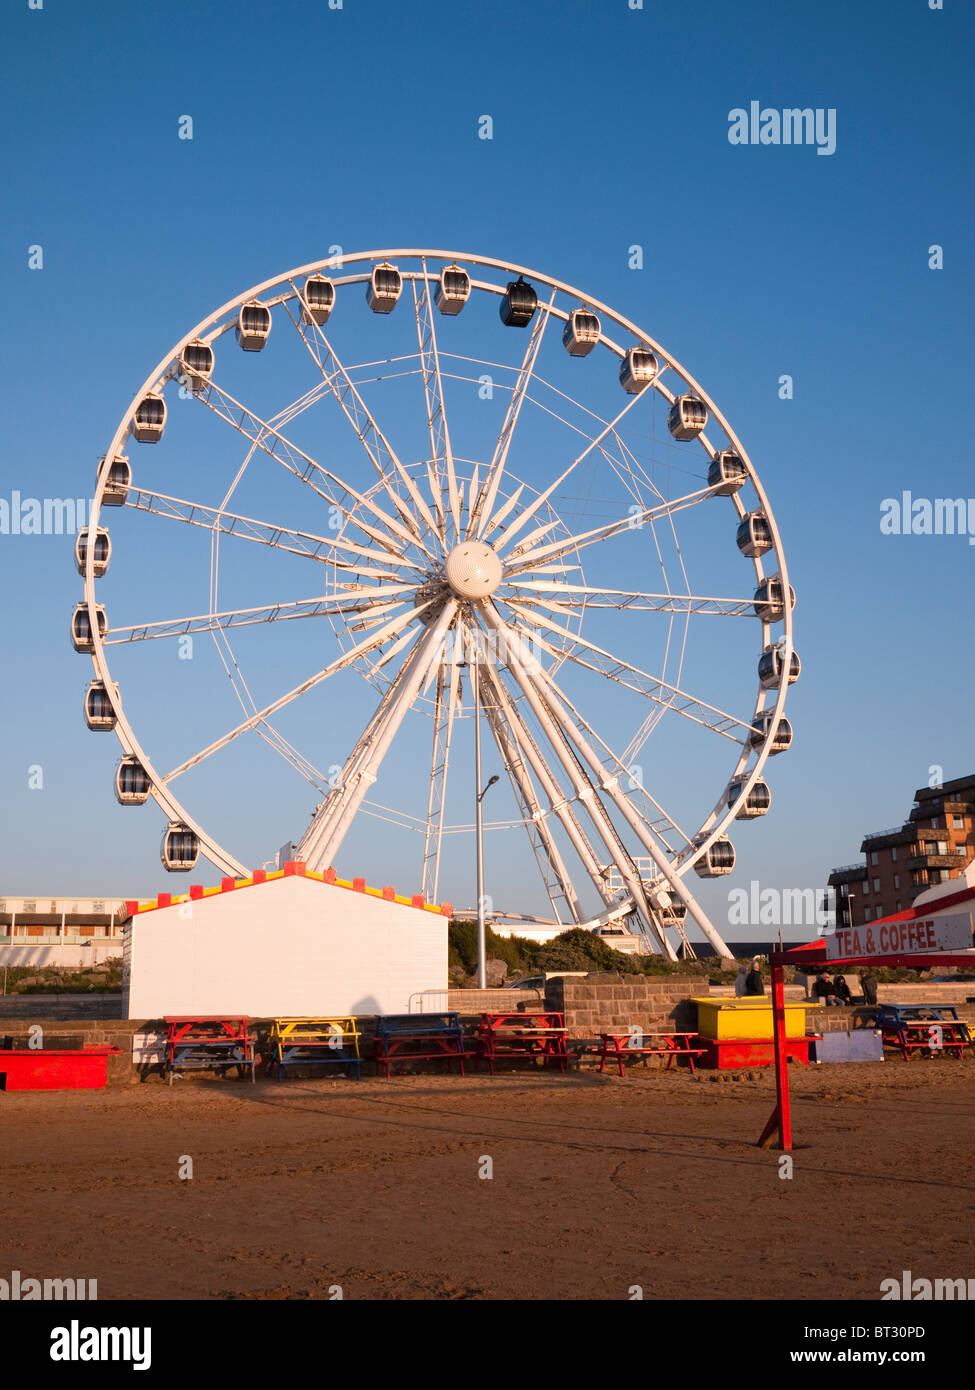 The Wheel of Weston on the seafront of Weston-super-Mare at sunset, North Somerset, England. Stock Photo